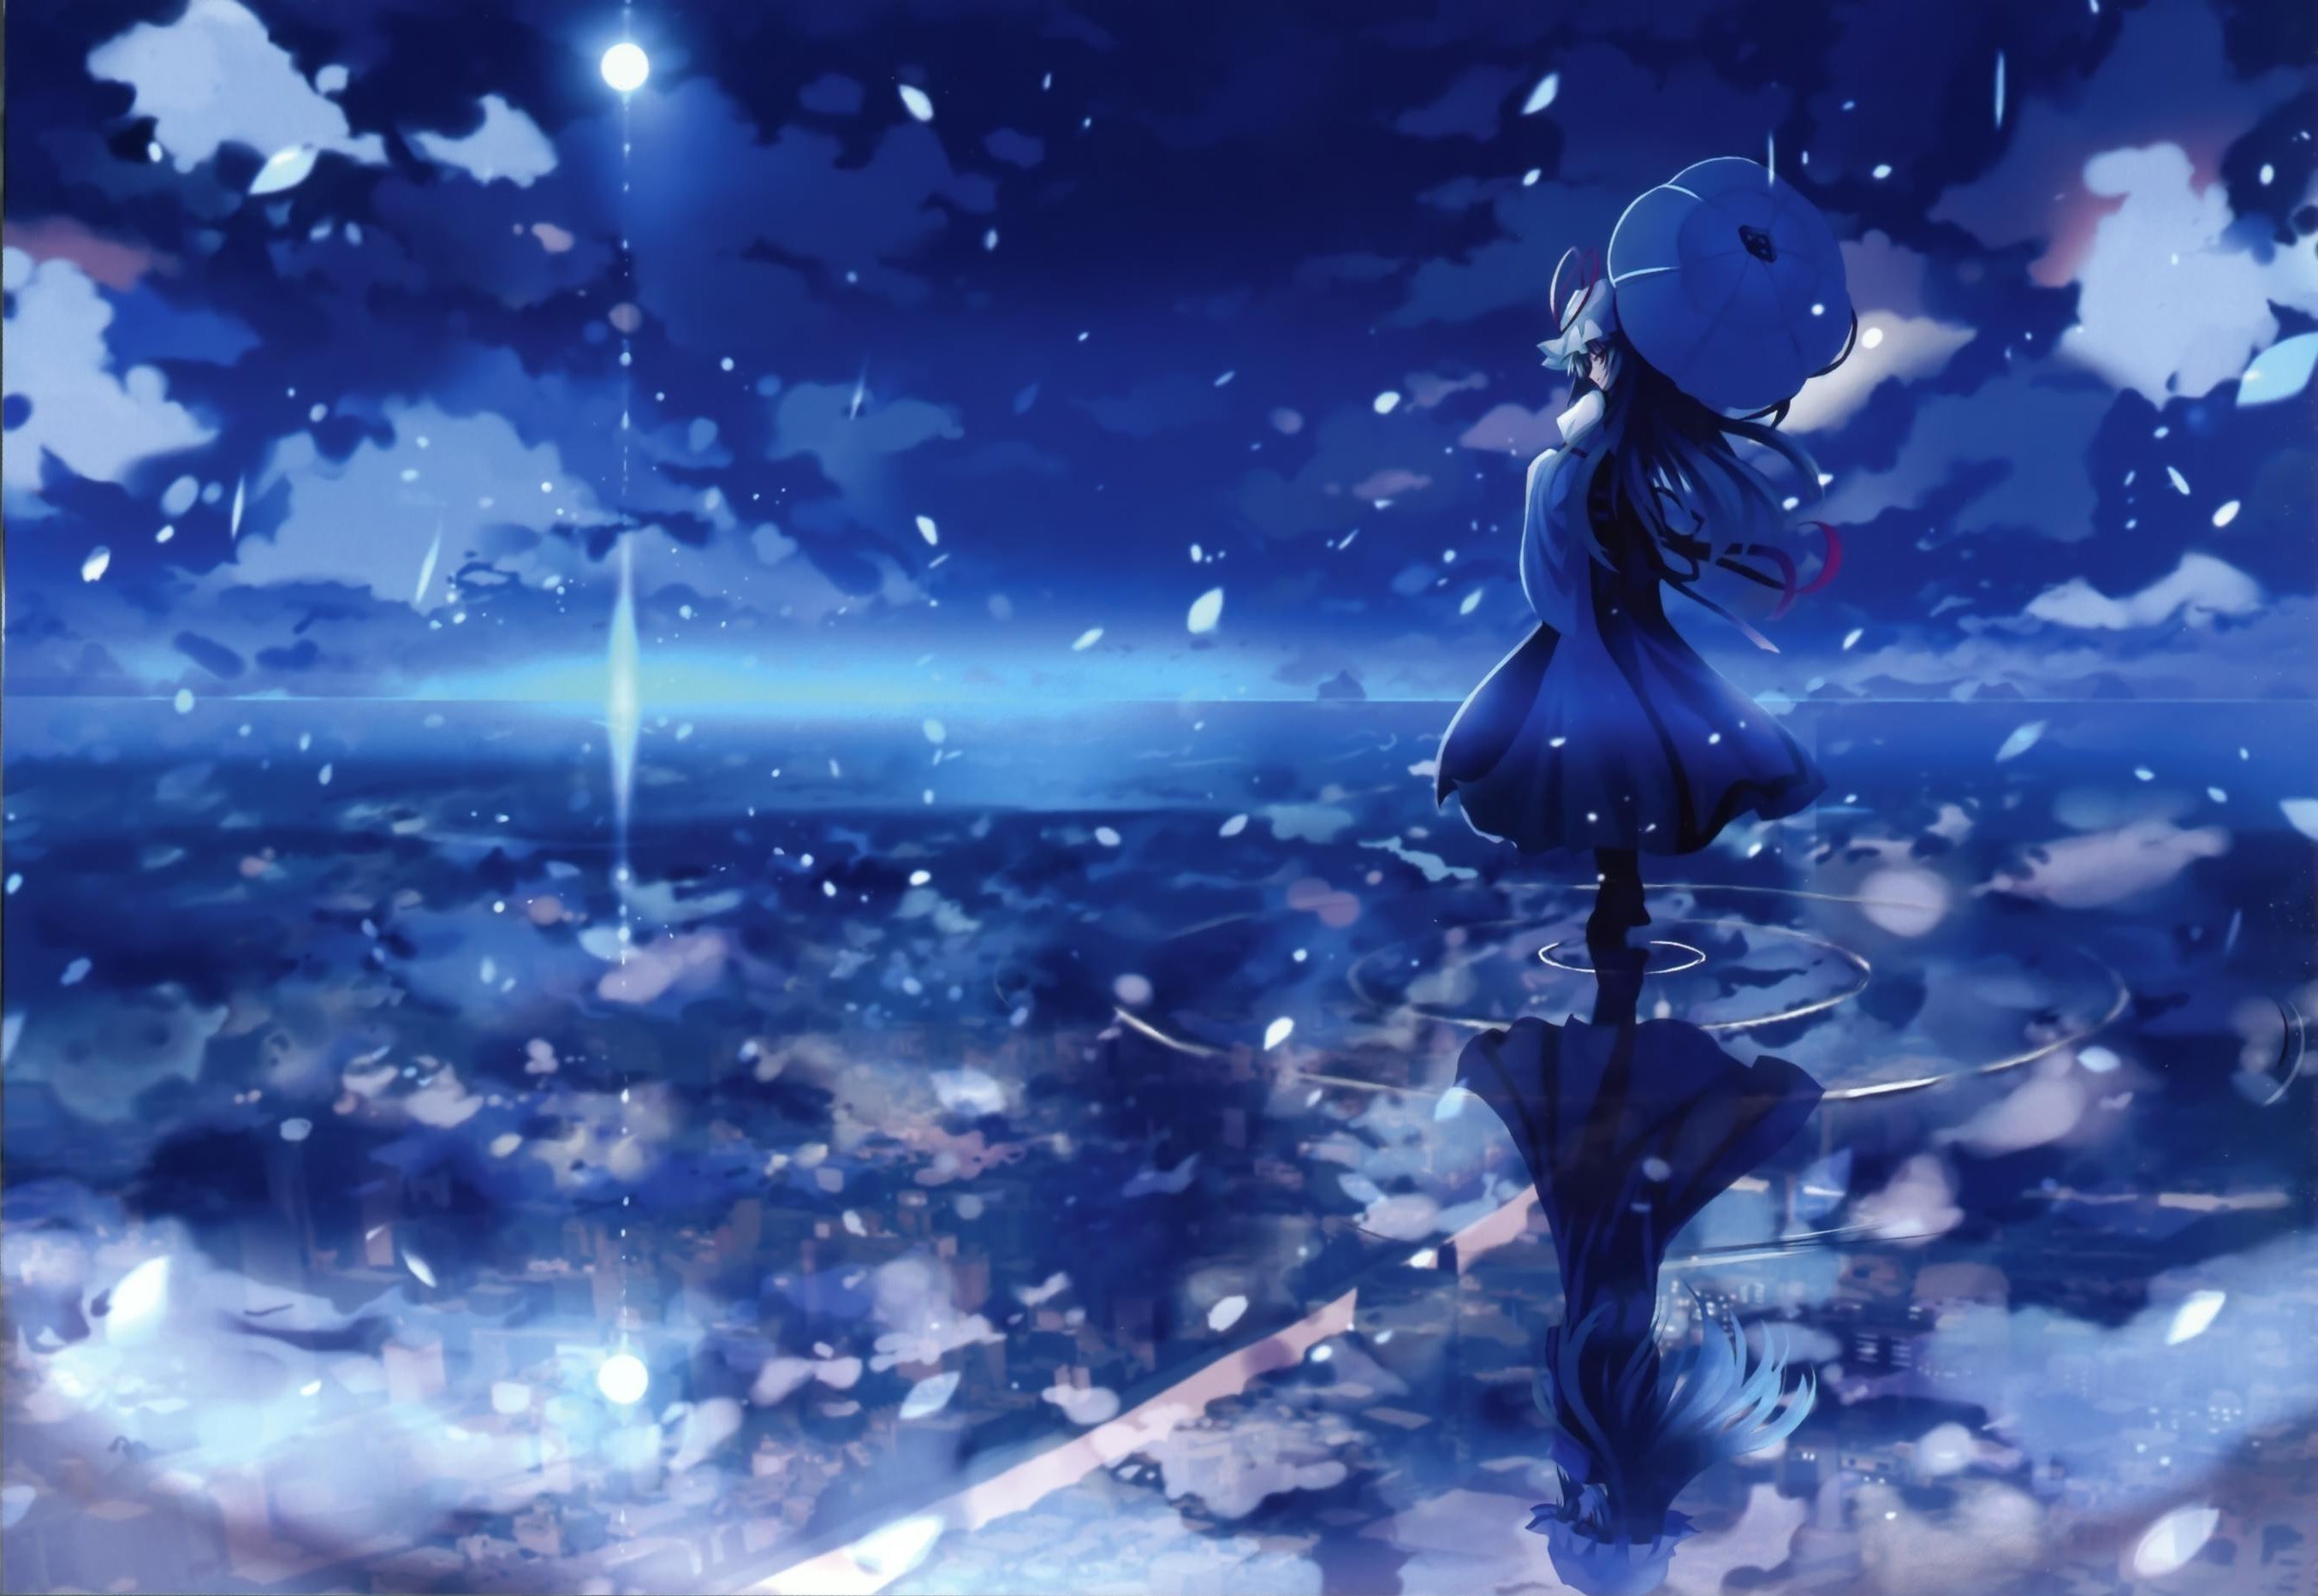 Umbrellas Skyscapes Reflections Anime Girls Wallpaper Background